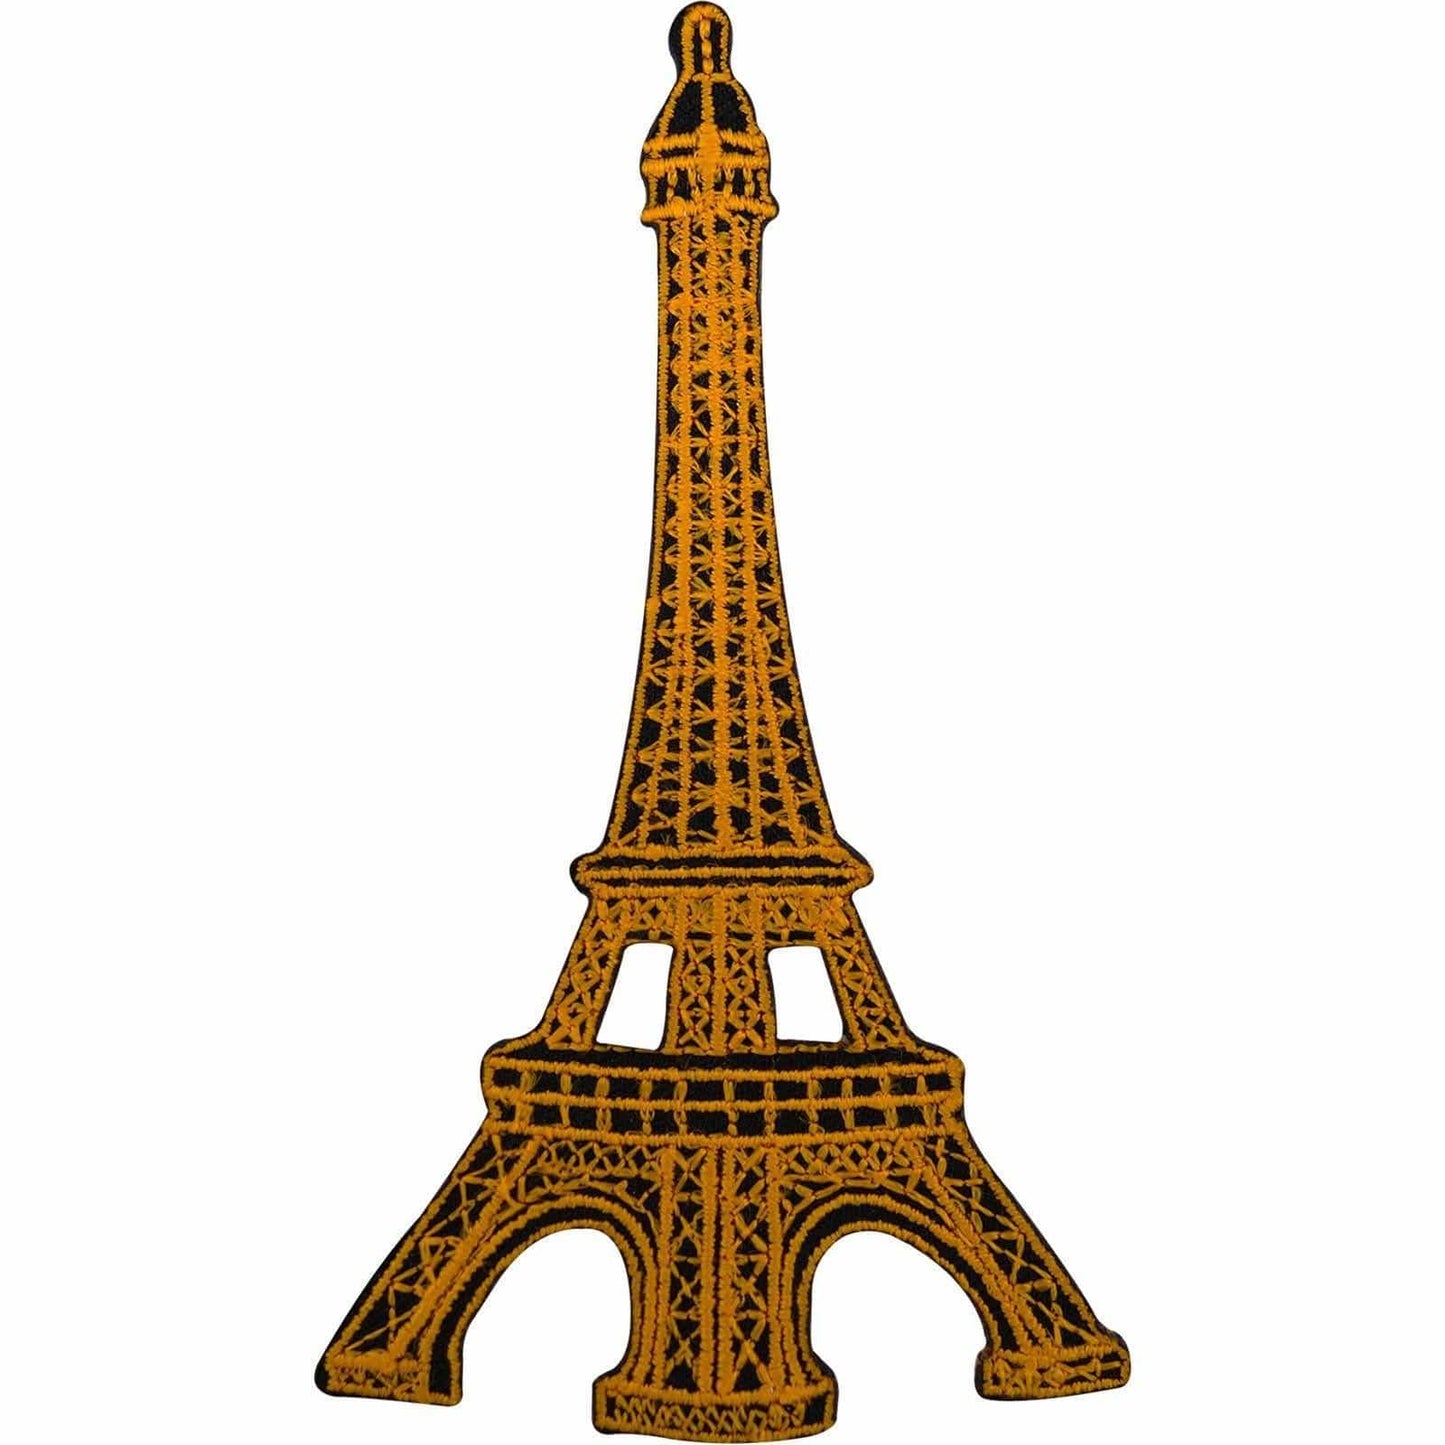 Eiffel Tower Badge Embroidery Patch Iron / Sew On French Paris France Souvenir